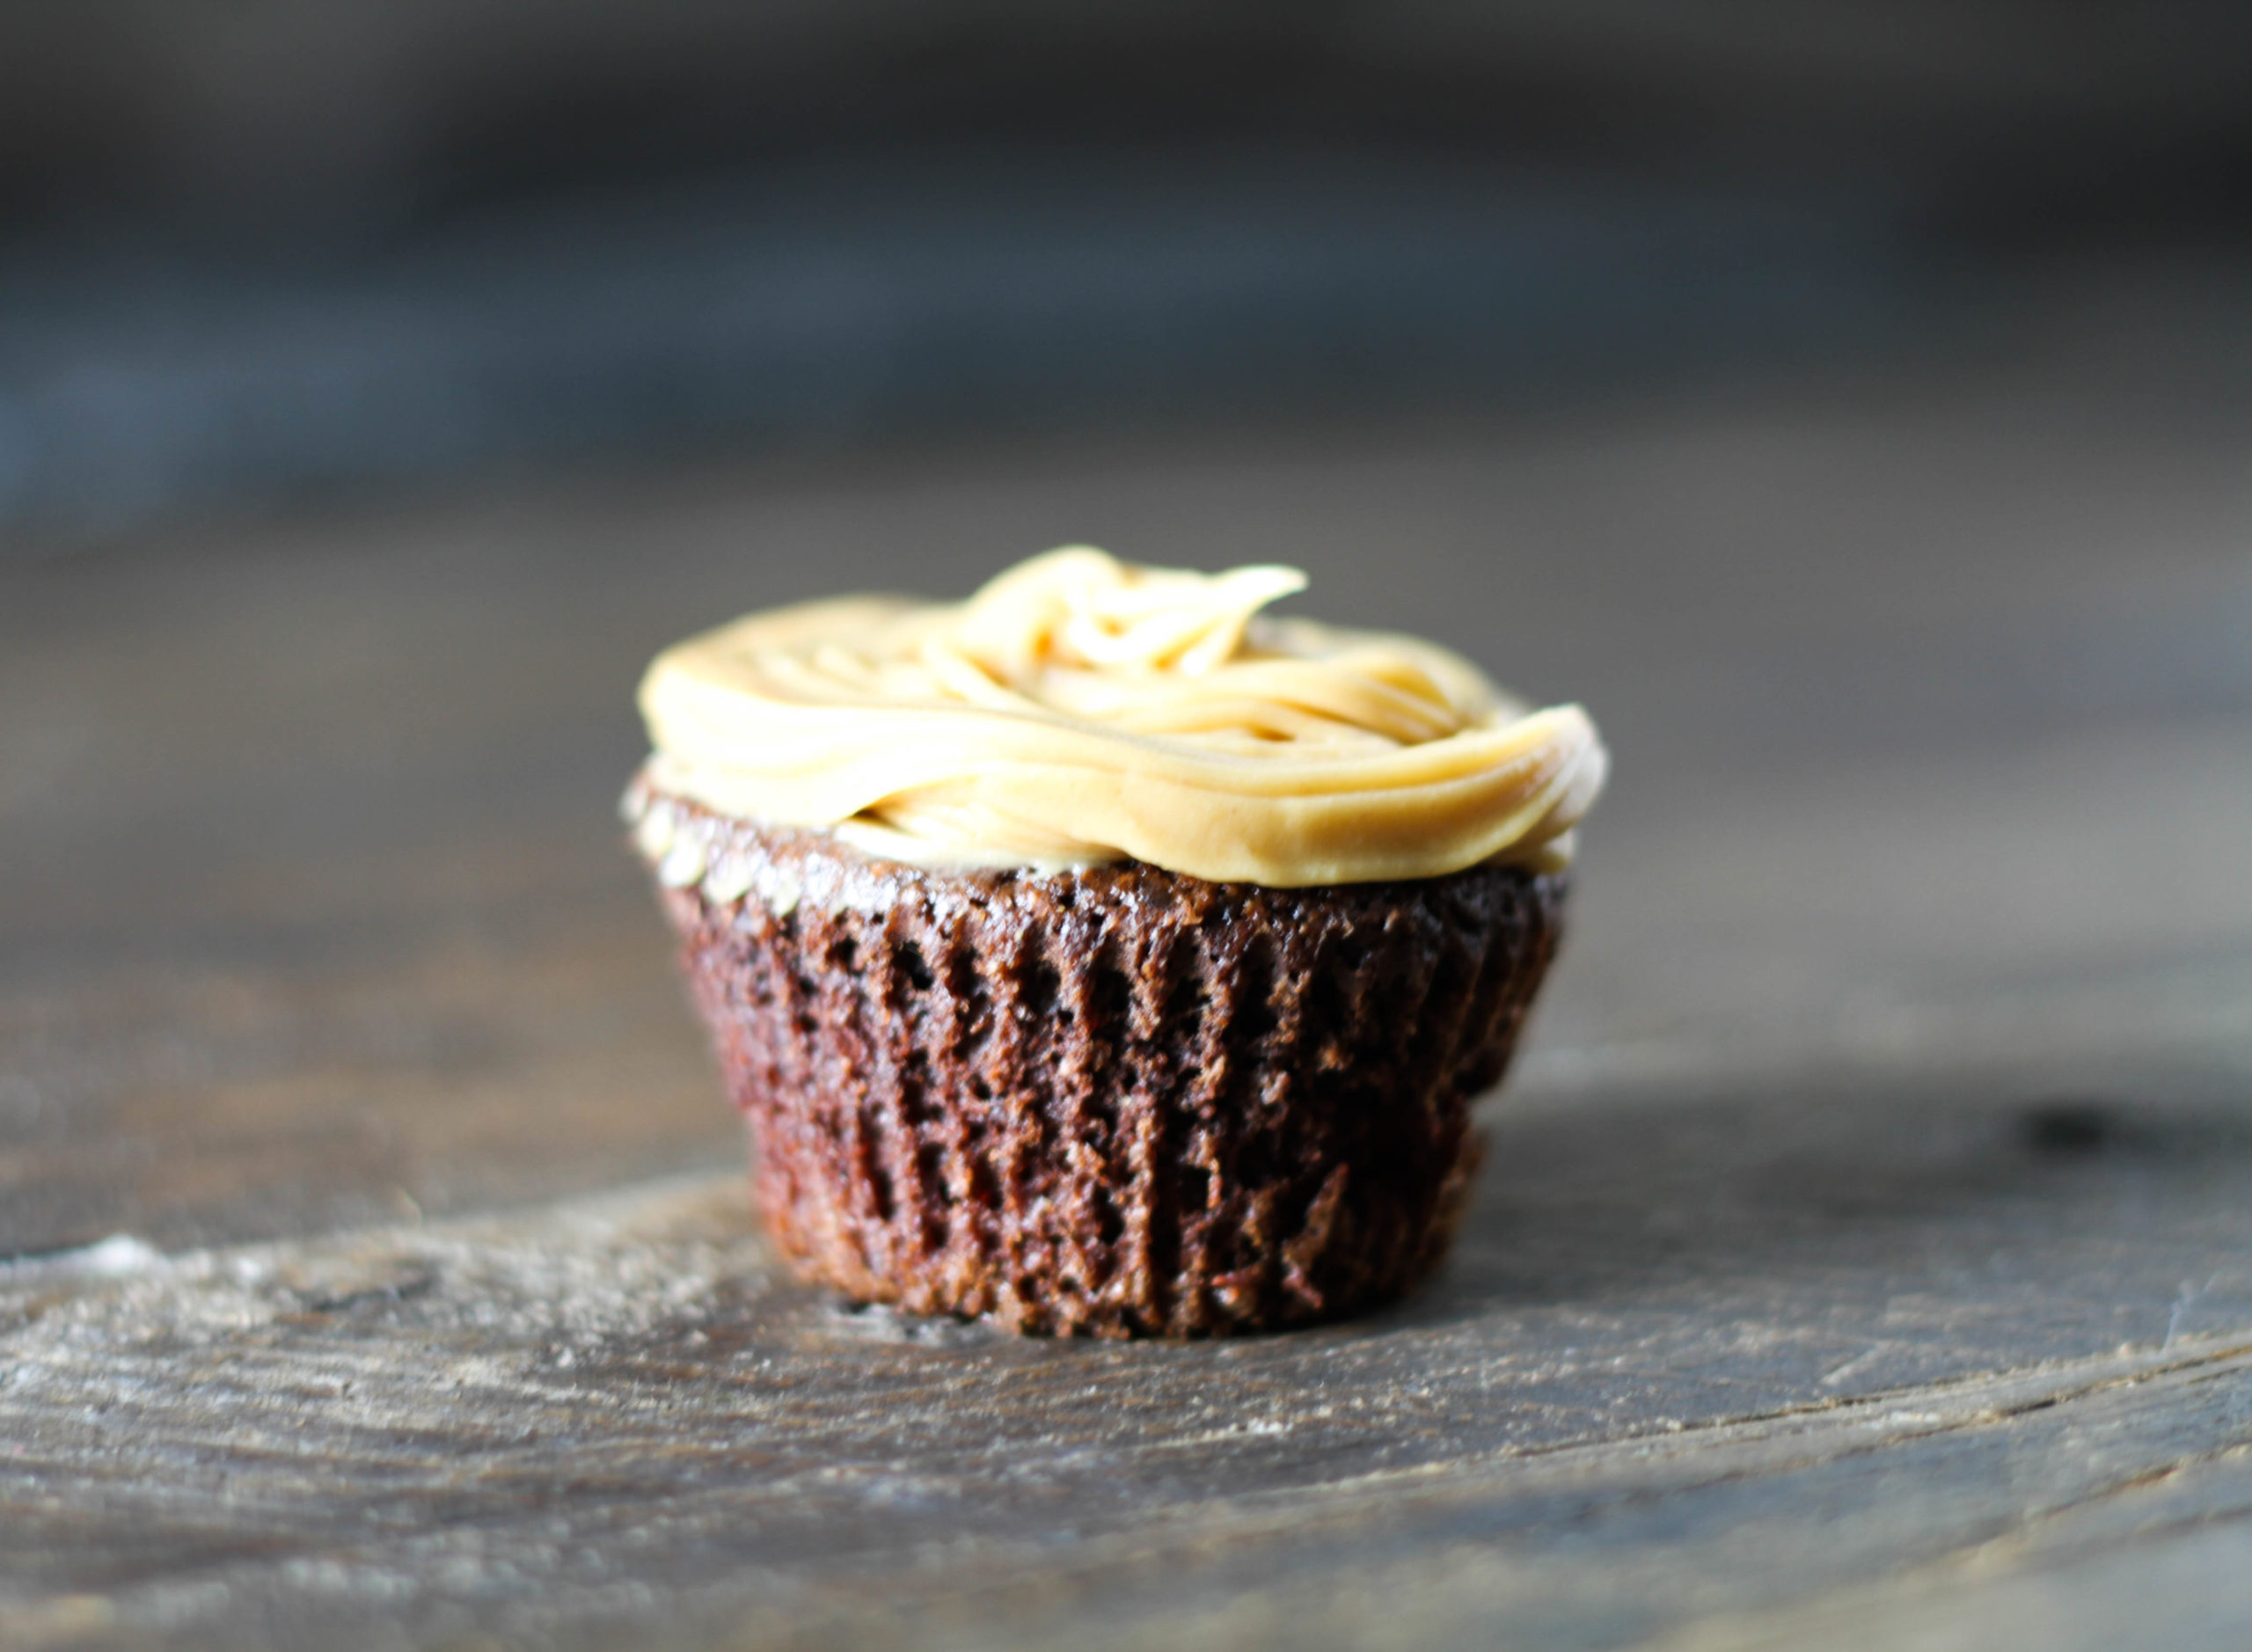 Nut butter cream frosting